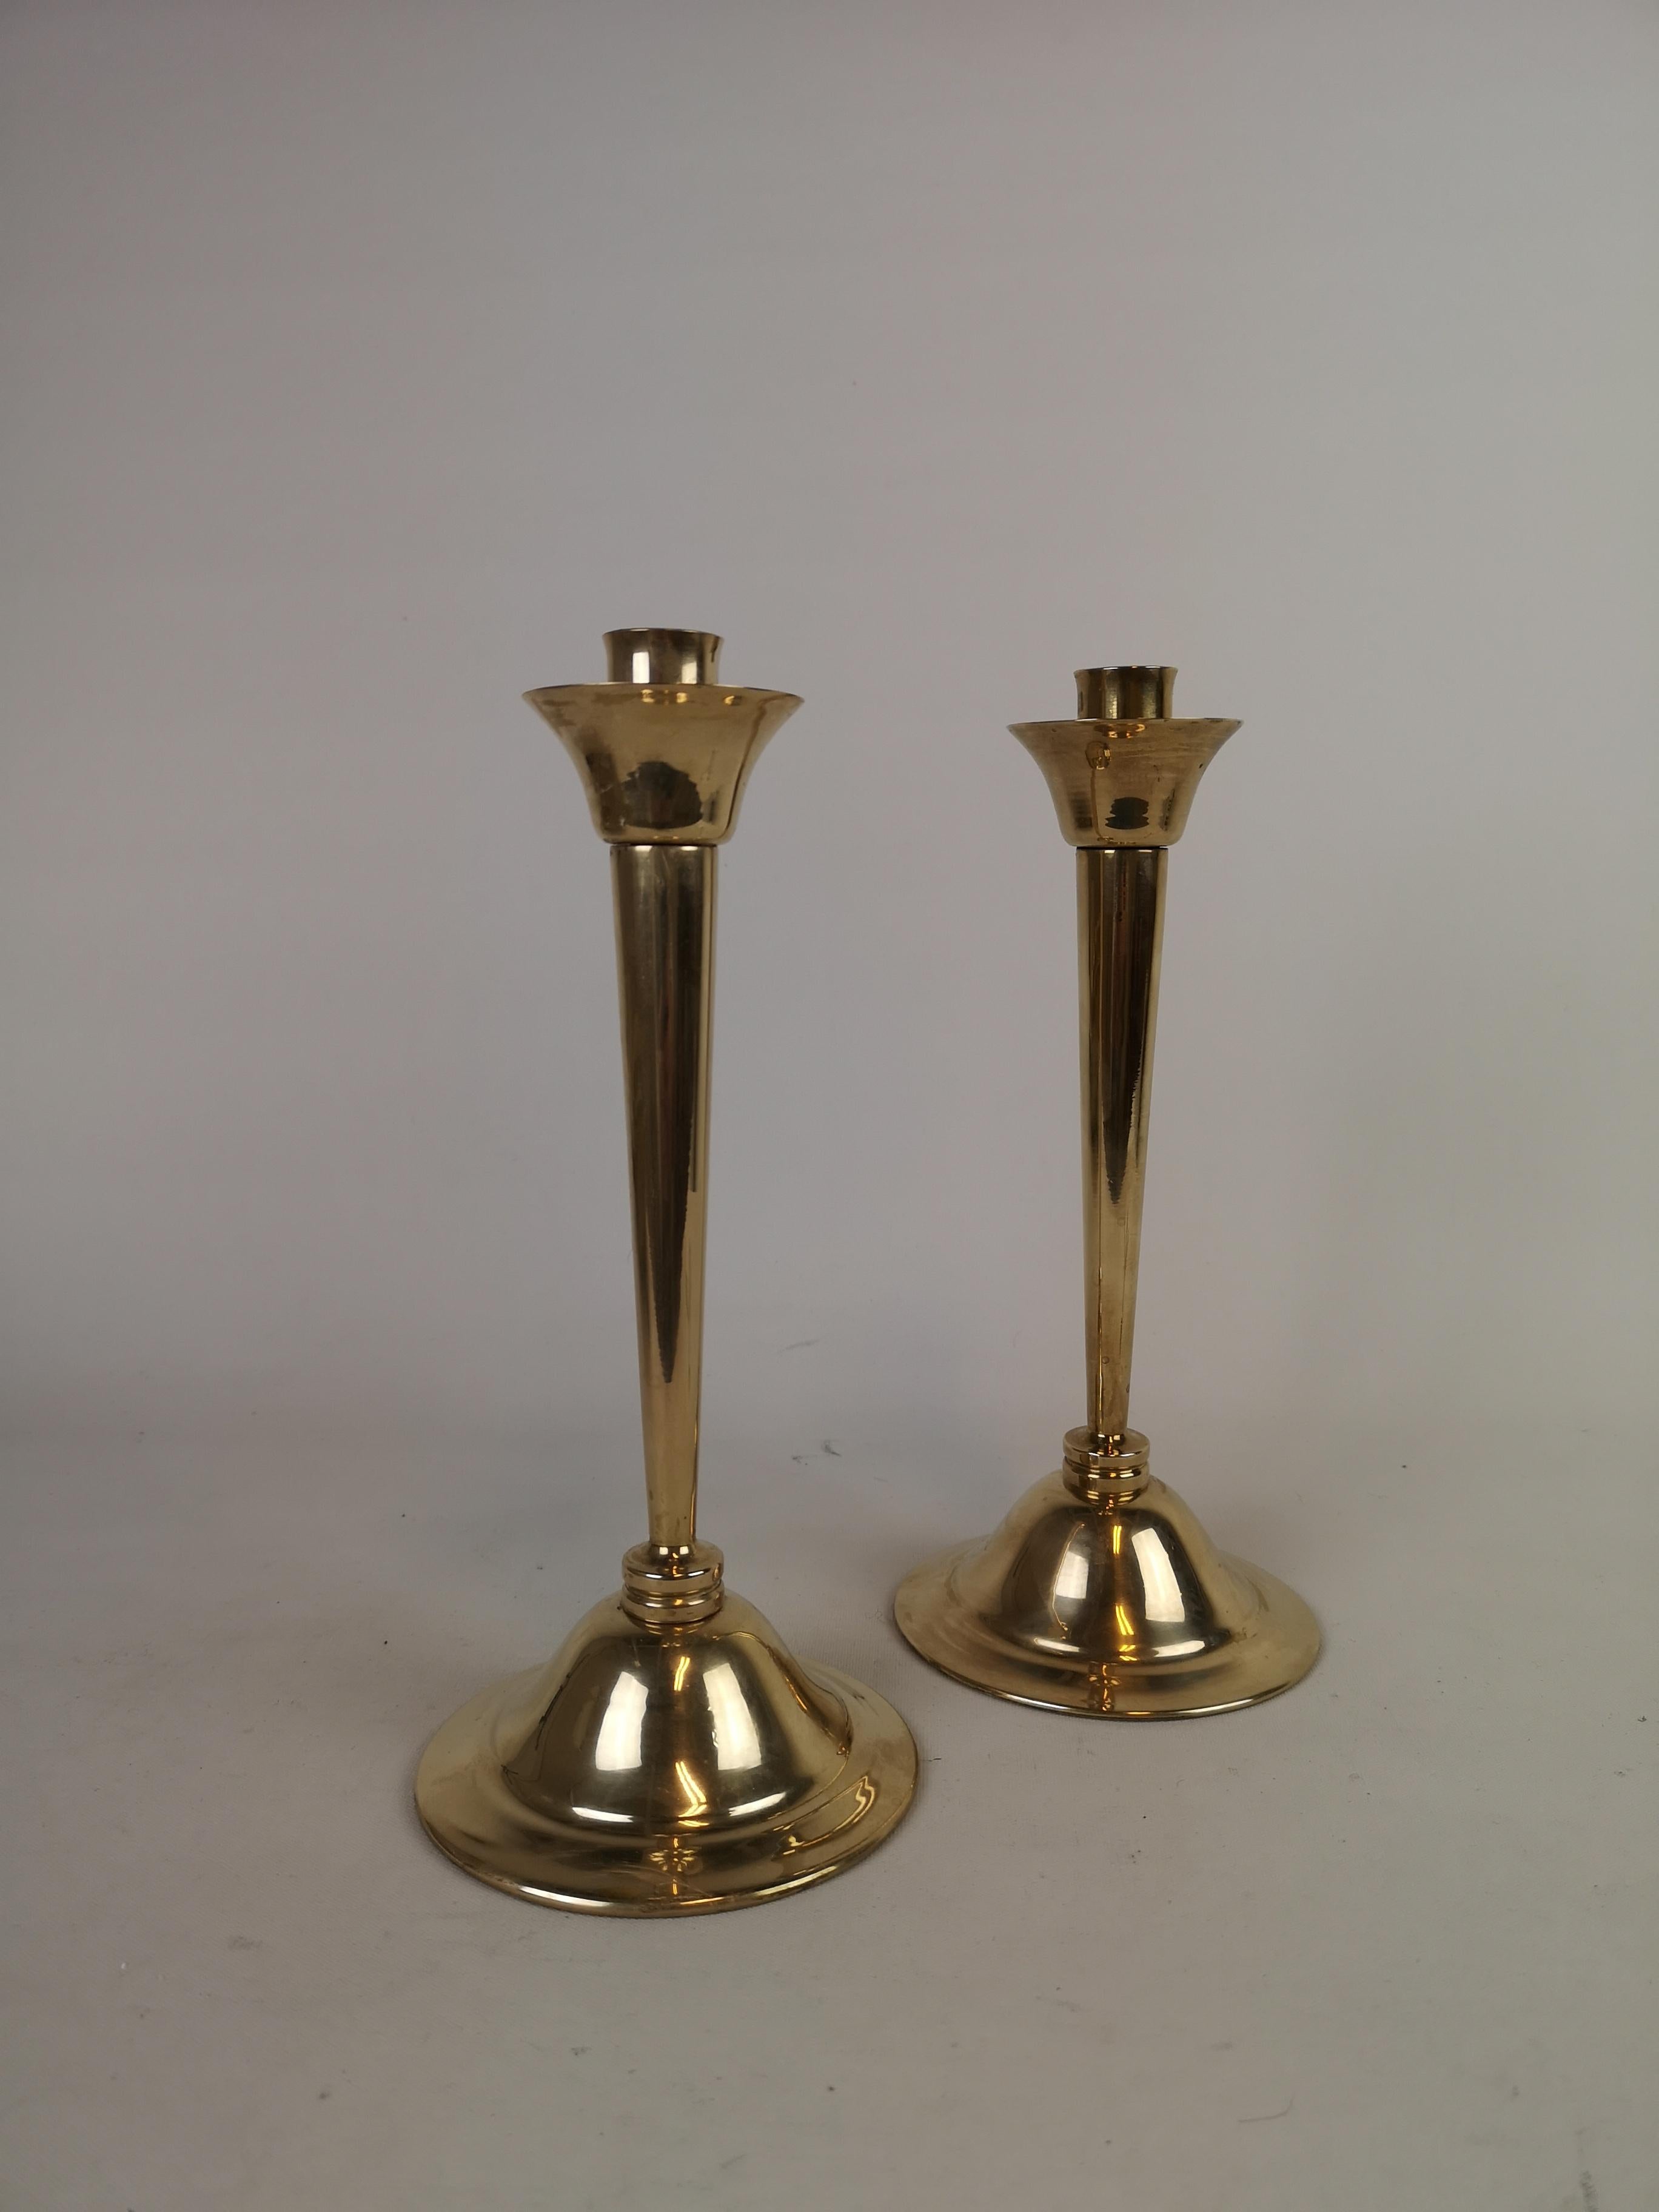 Scandinavian Modern Set of Pair of Candlestick and Tray in Brass by Lars Holmström Arvika, Sweden